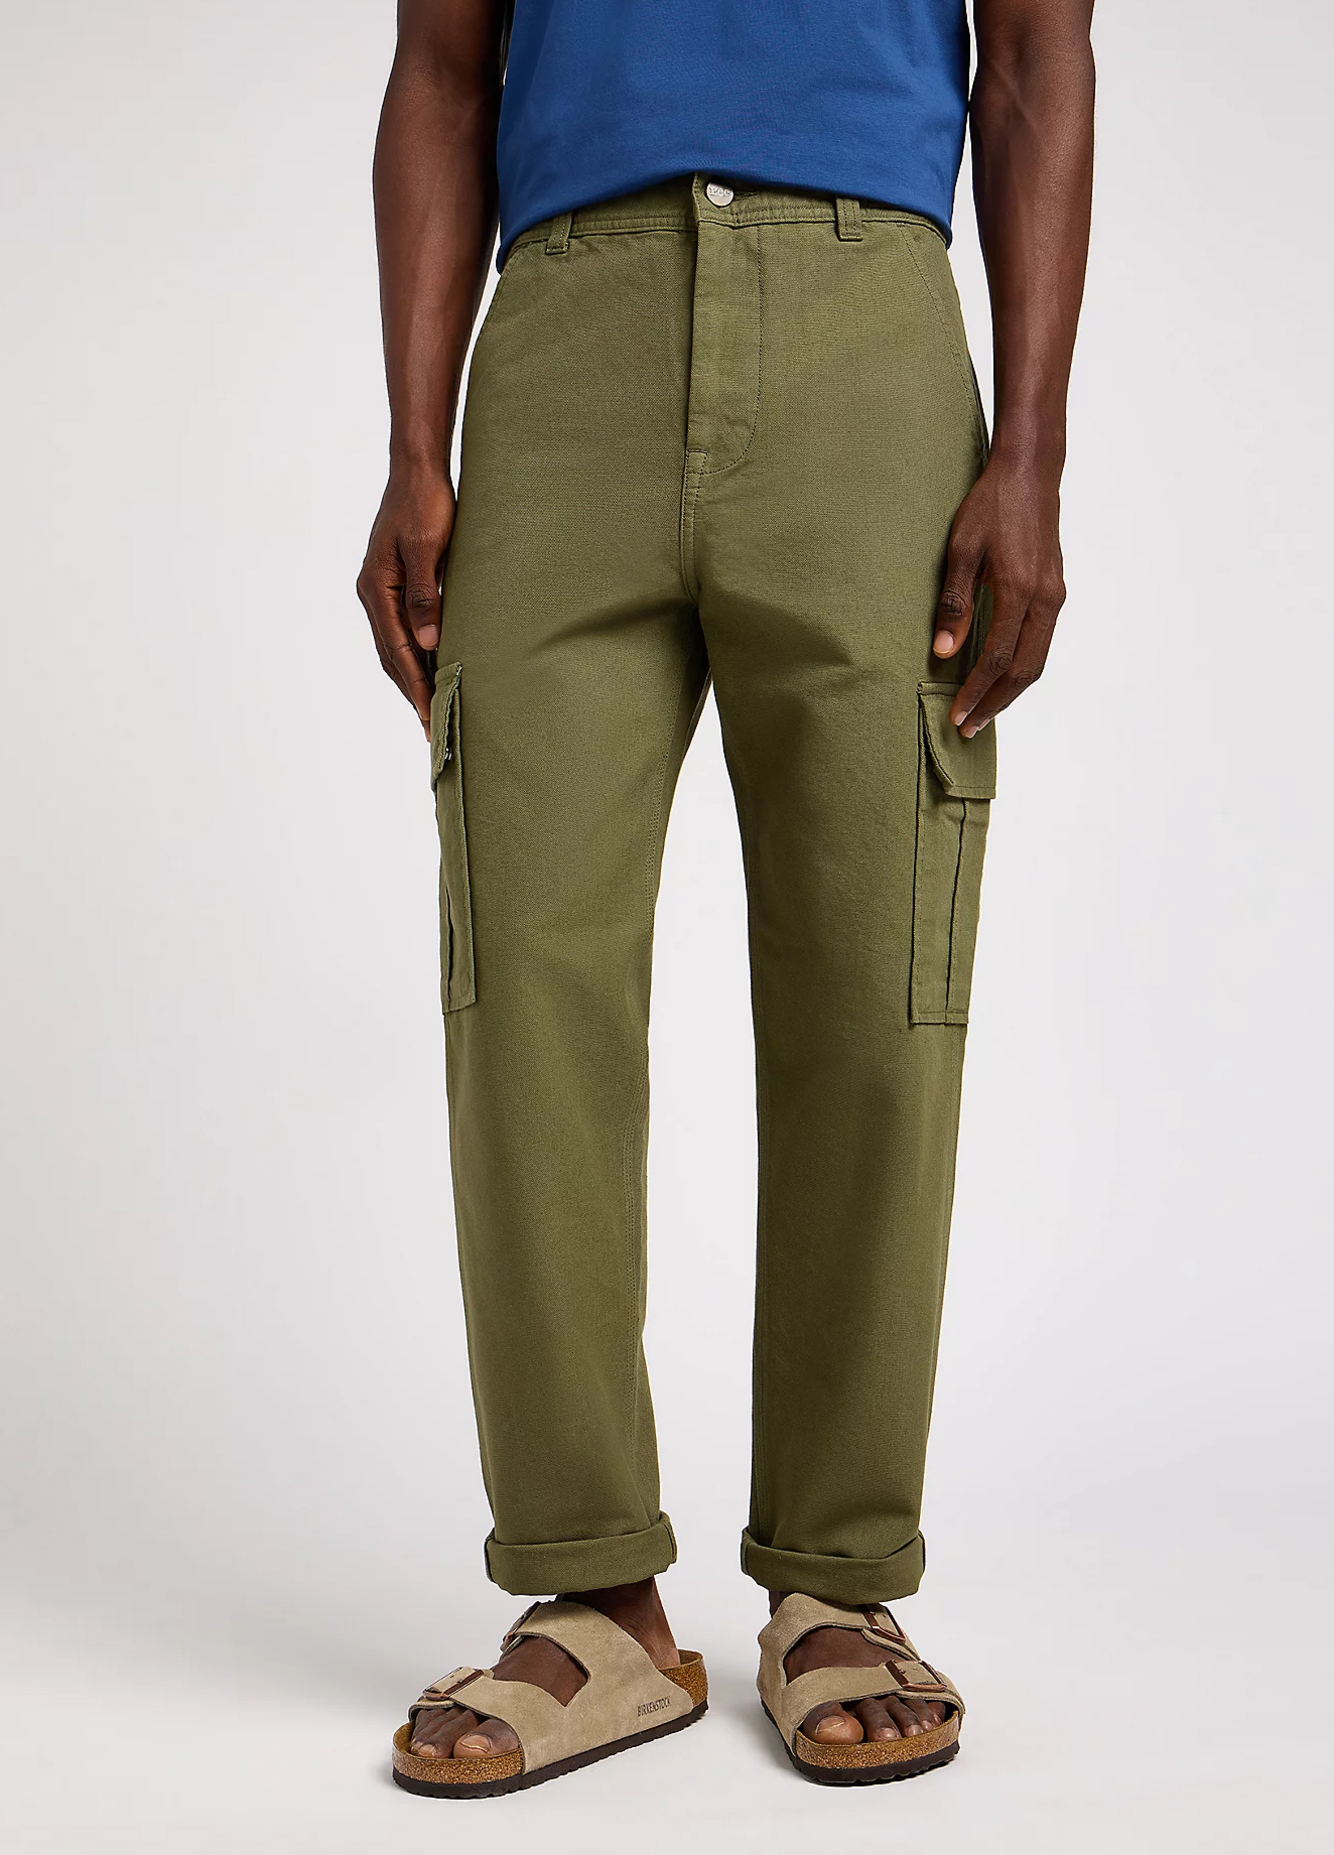 Men's Khaki Stretcher Trousers - Army Green in Central Division